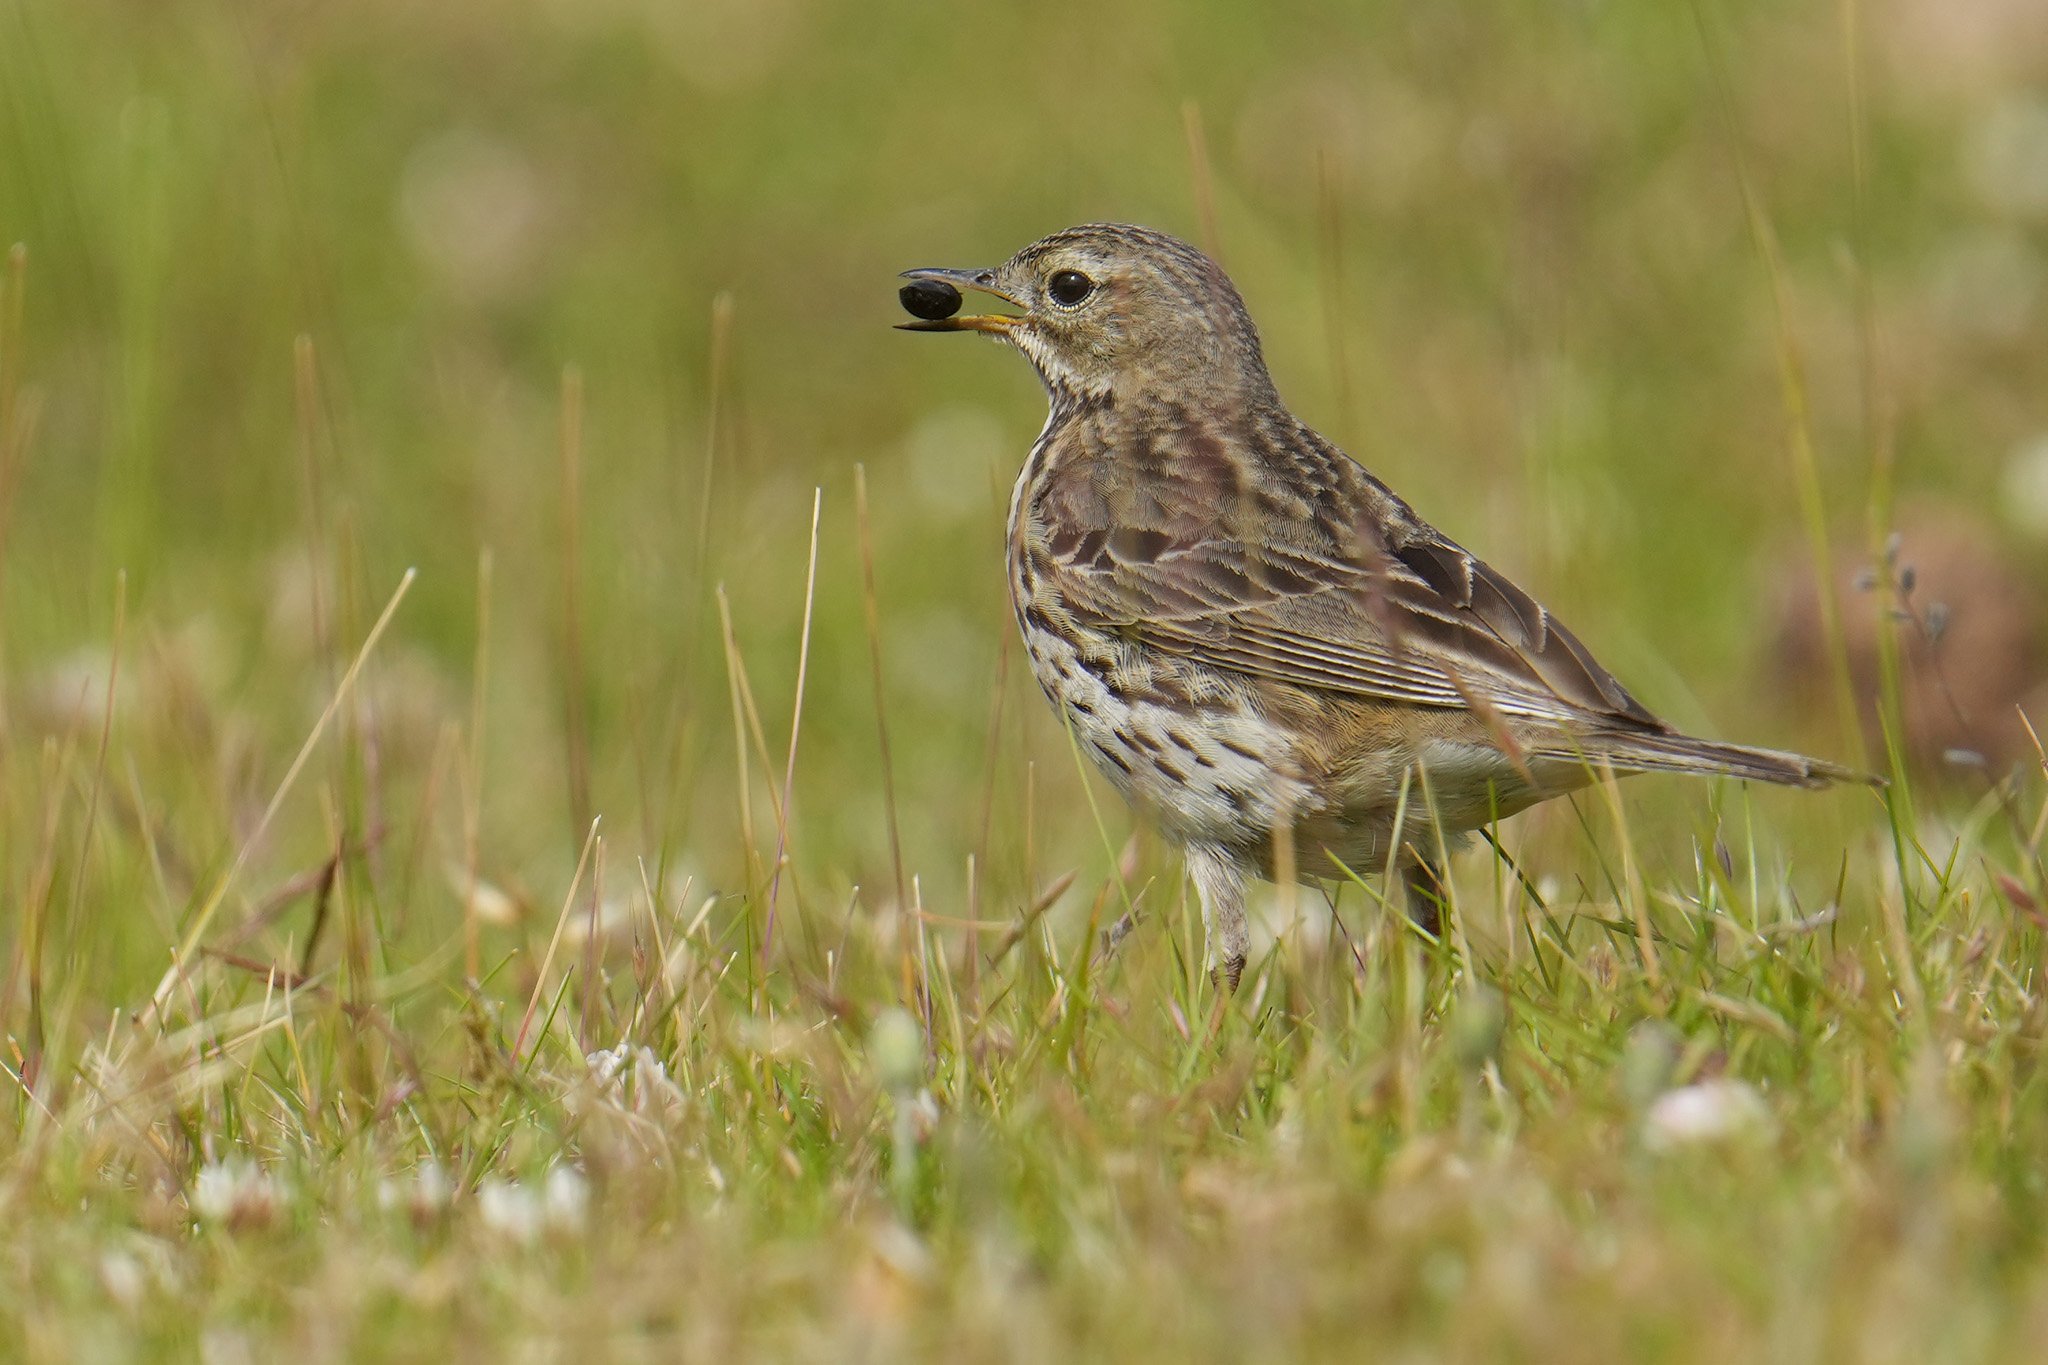 Bird Meadow pipit shot with Sony FE 200-600 F5.6-6.3 G lens.